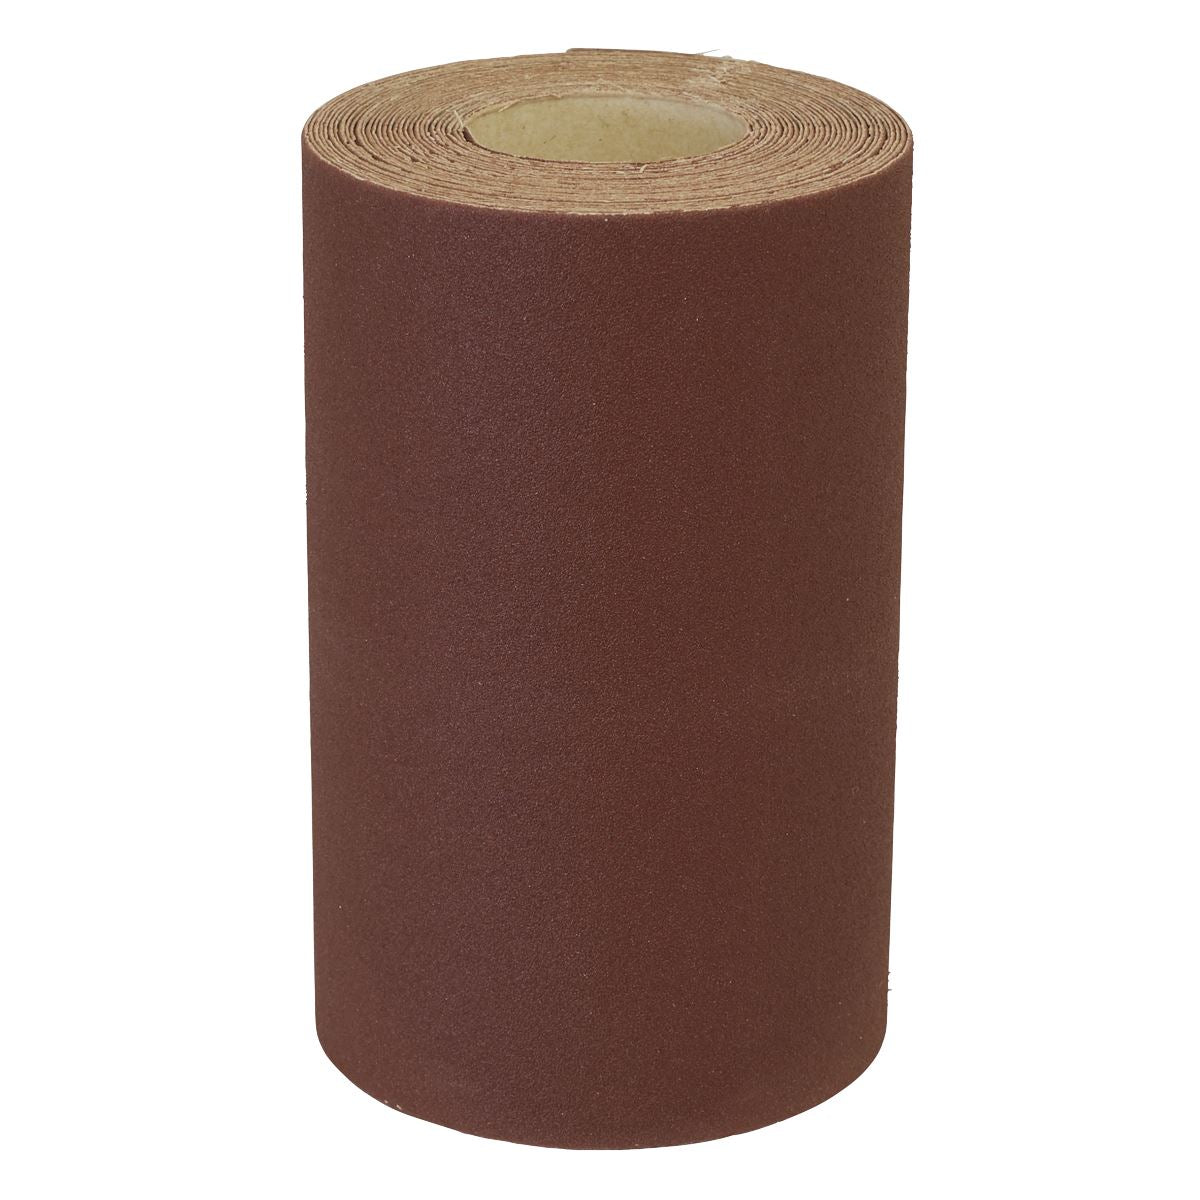 Worksafe by Sealey Production Sanding Roll 115mm x 5m - Extra-Fine 180Grit